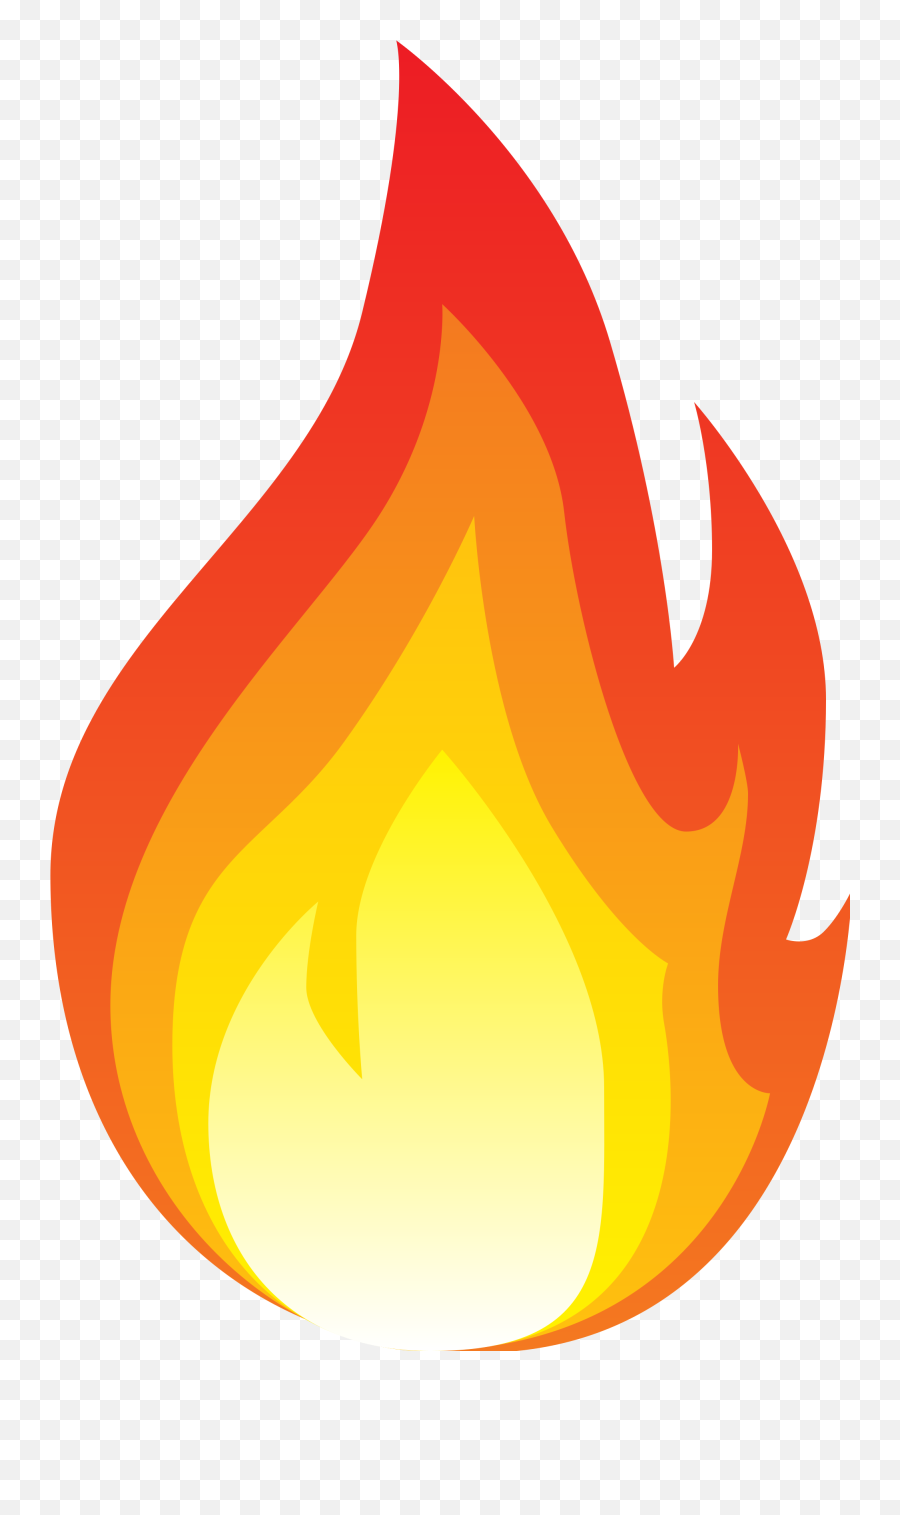 Download And Share Clipart About Fire Emoji,Cartoon Transparent Background Fire Flame Emoji